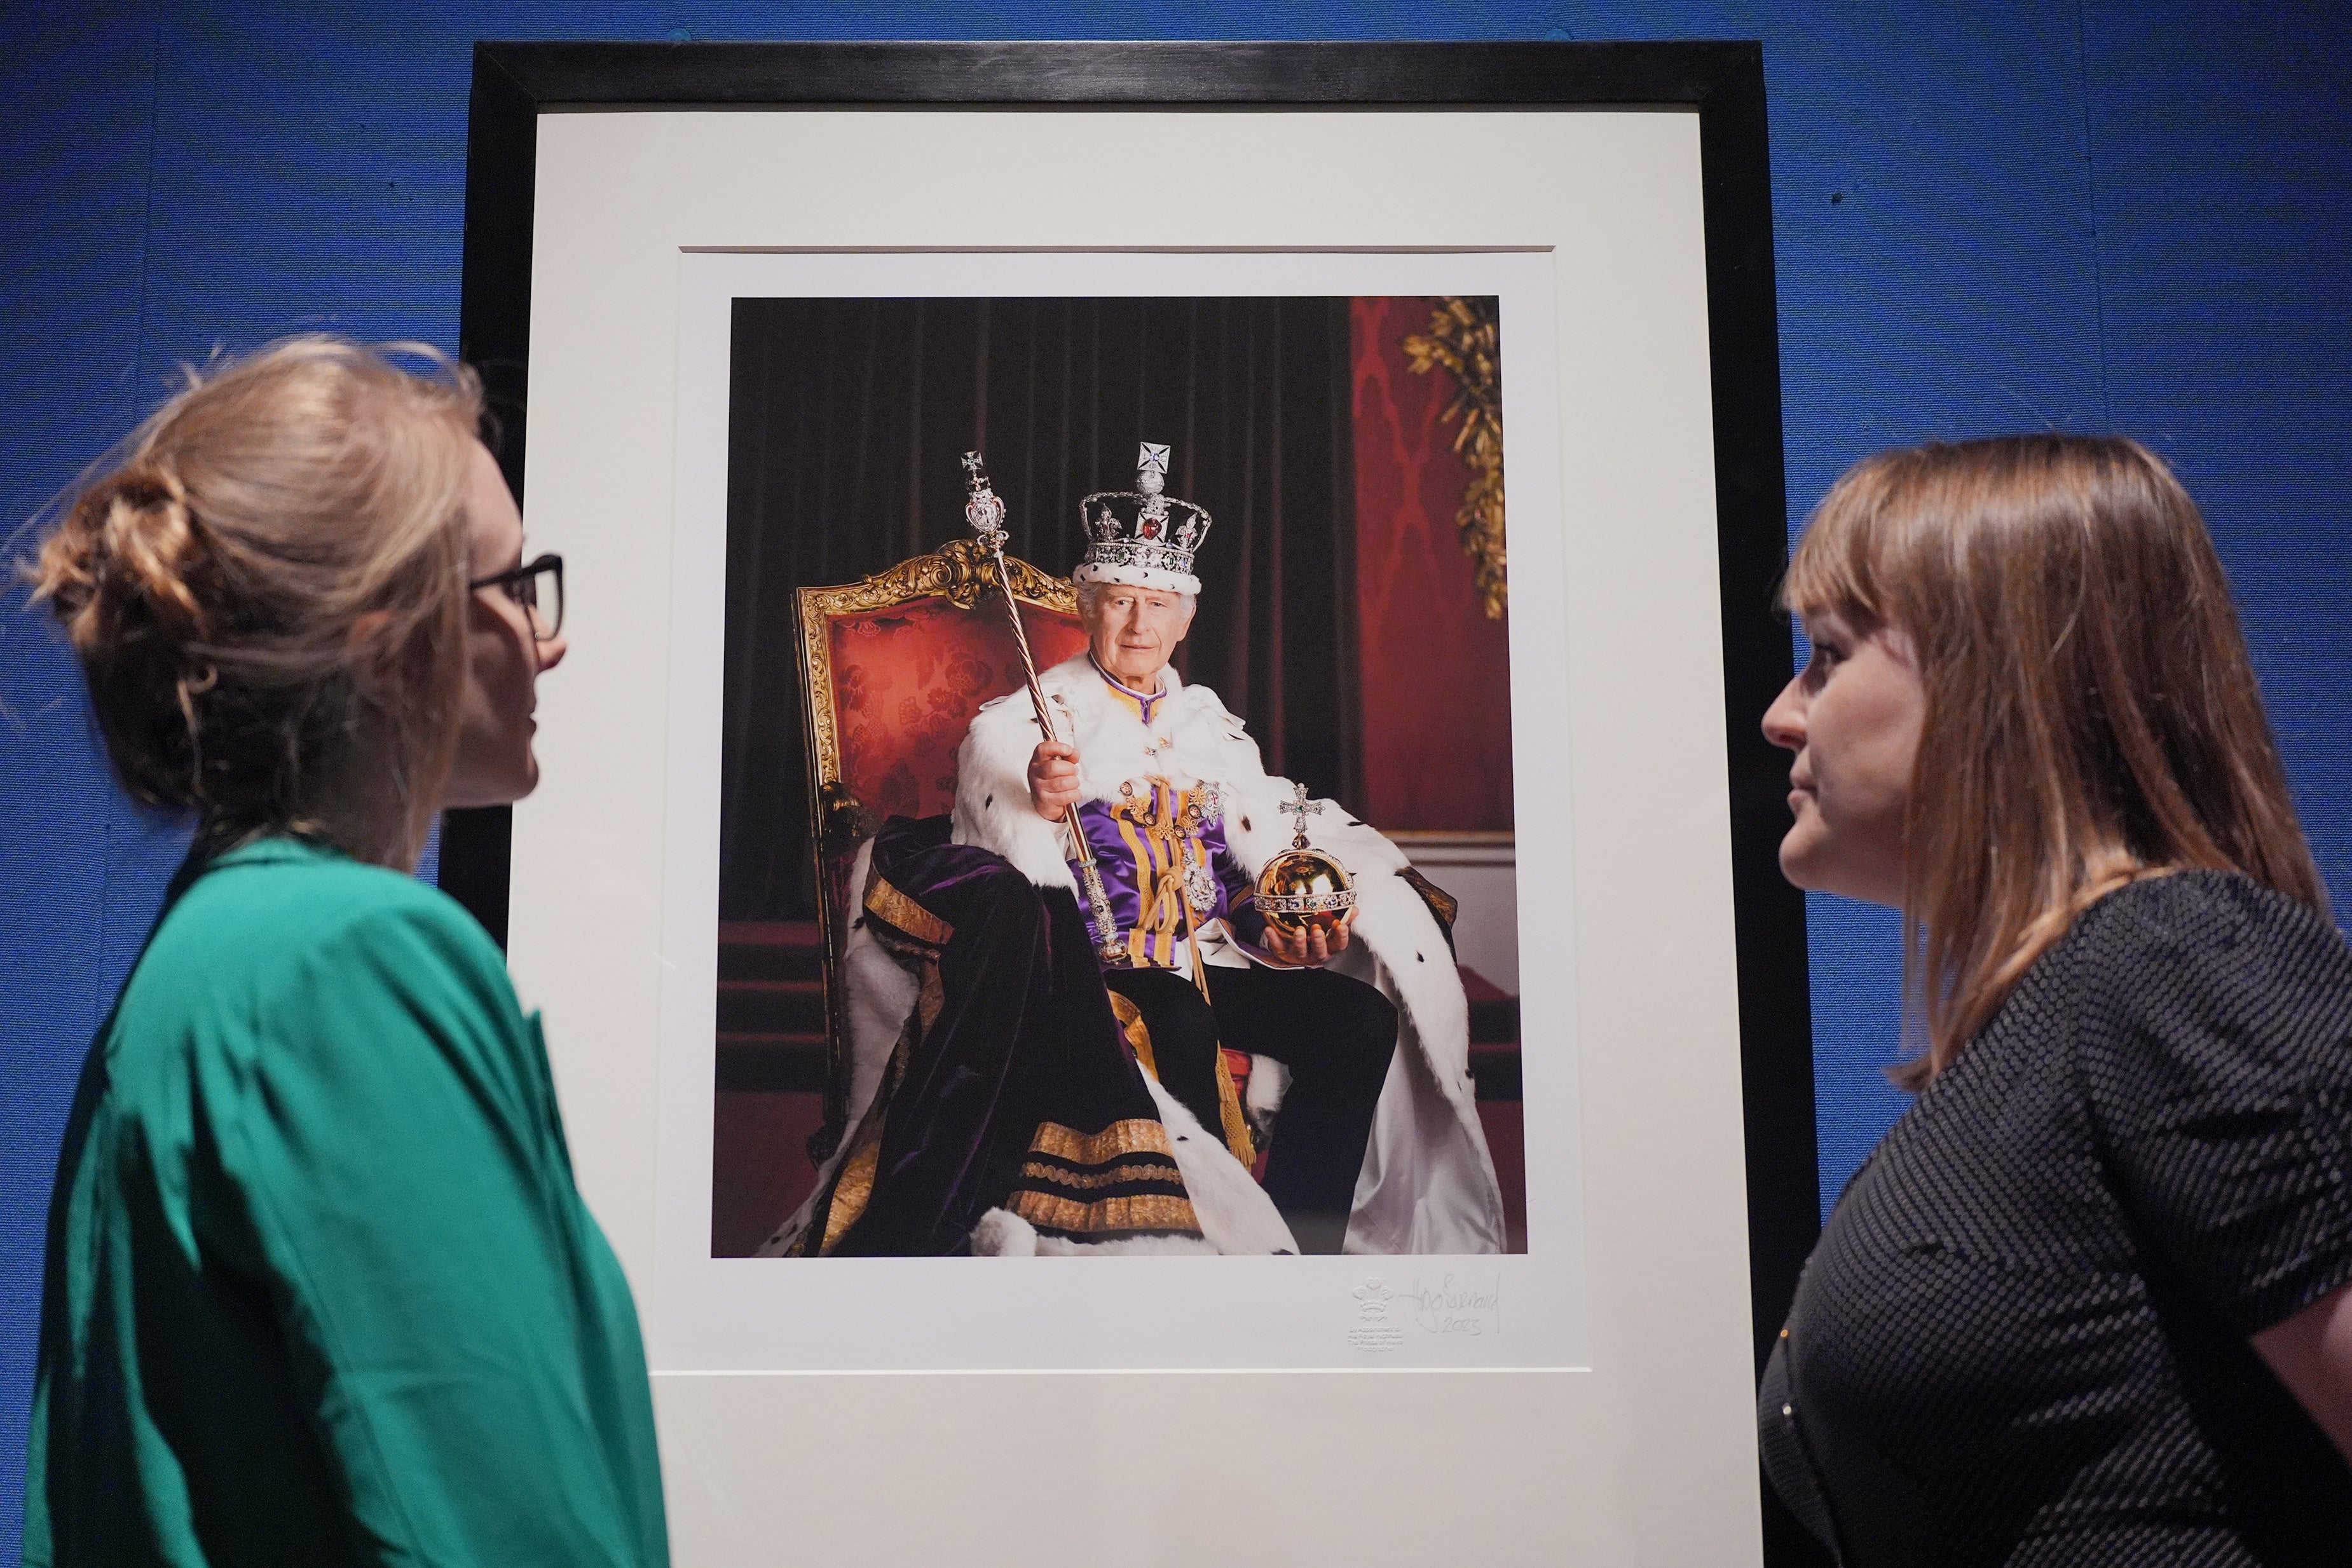 The exhibition features members past and present members of the royal family